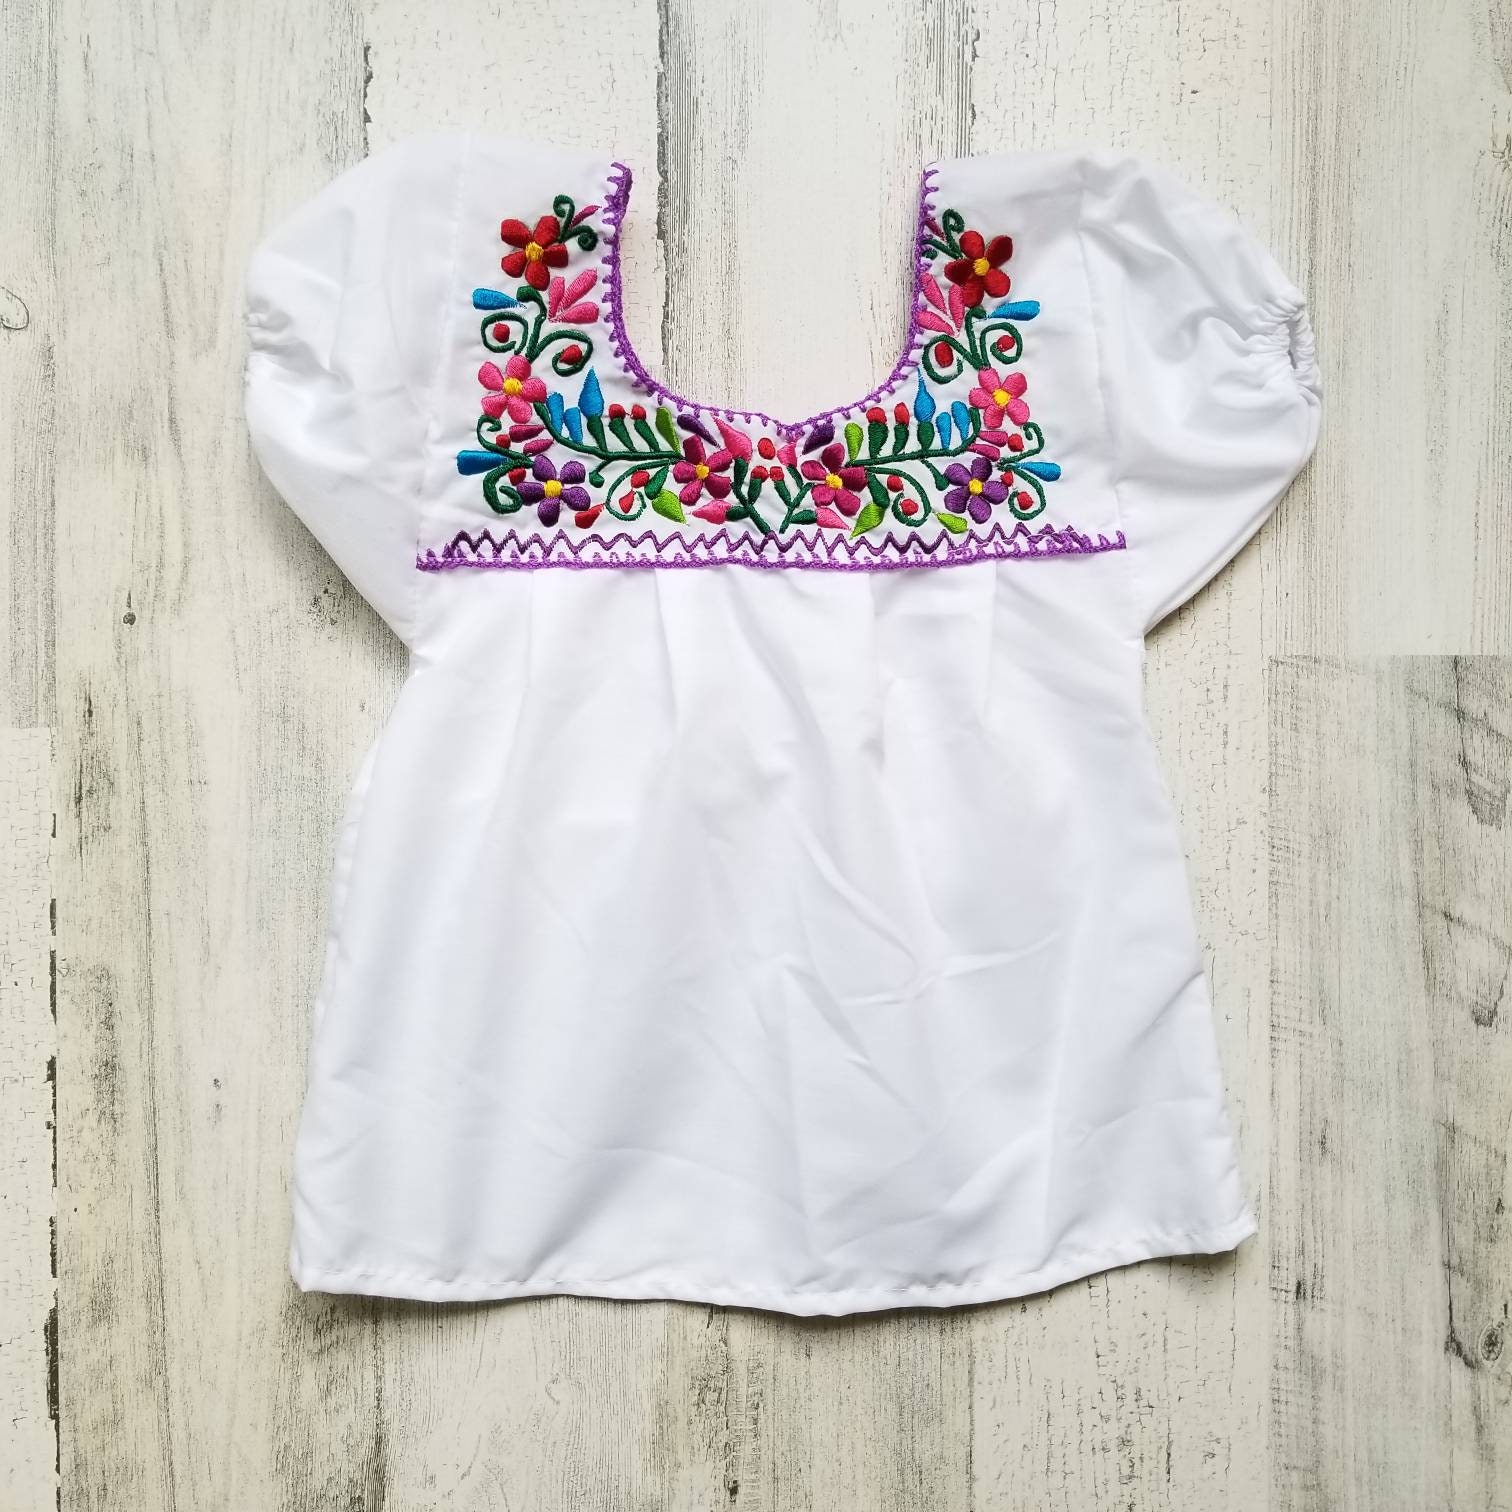 Mexican Dress for Girls Mexican Embroidered Girls Dress | Etsy